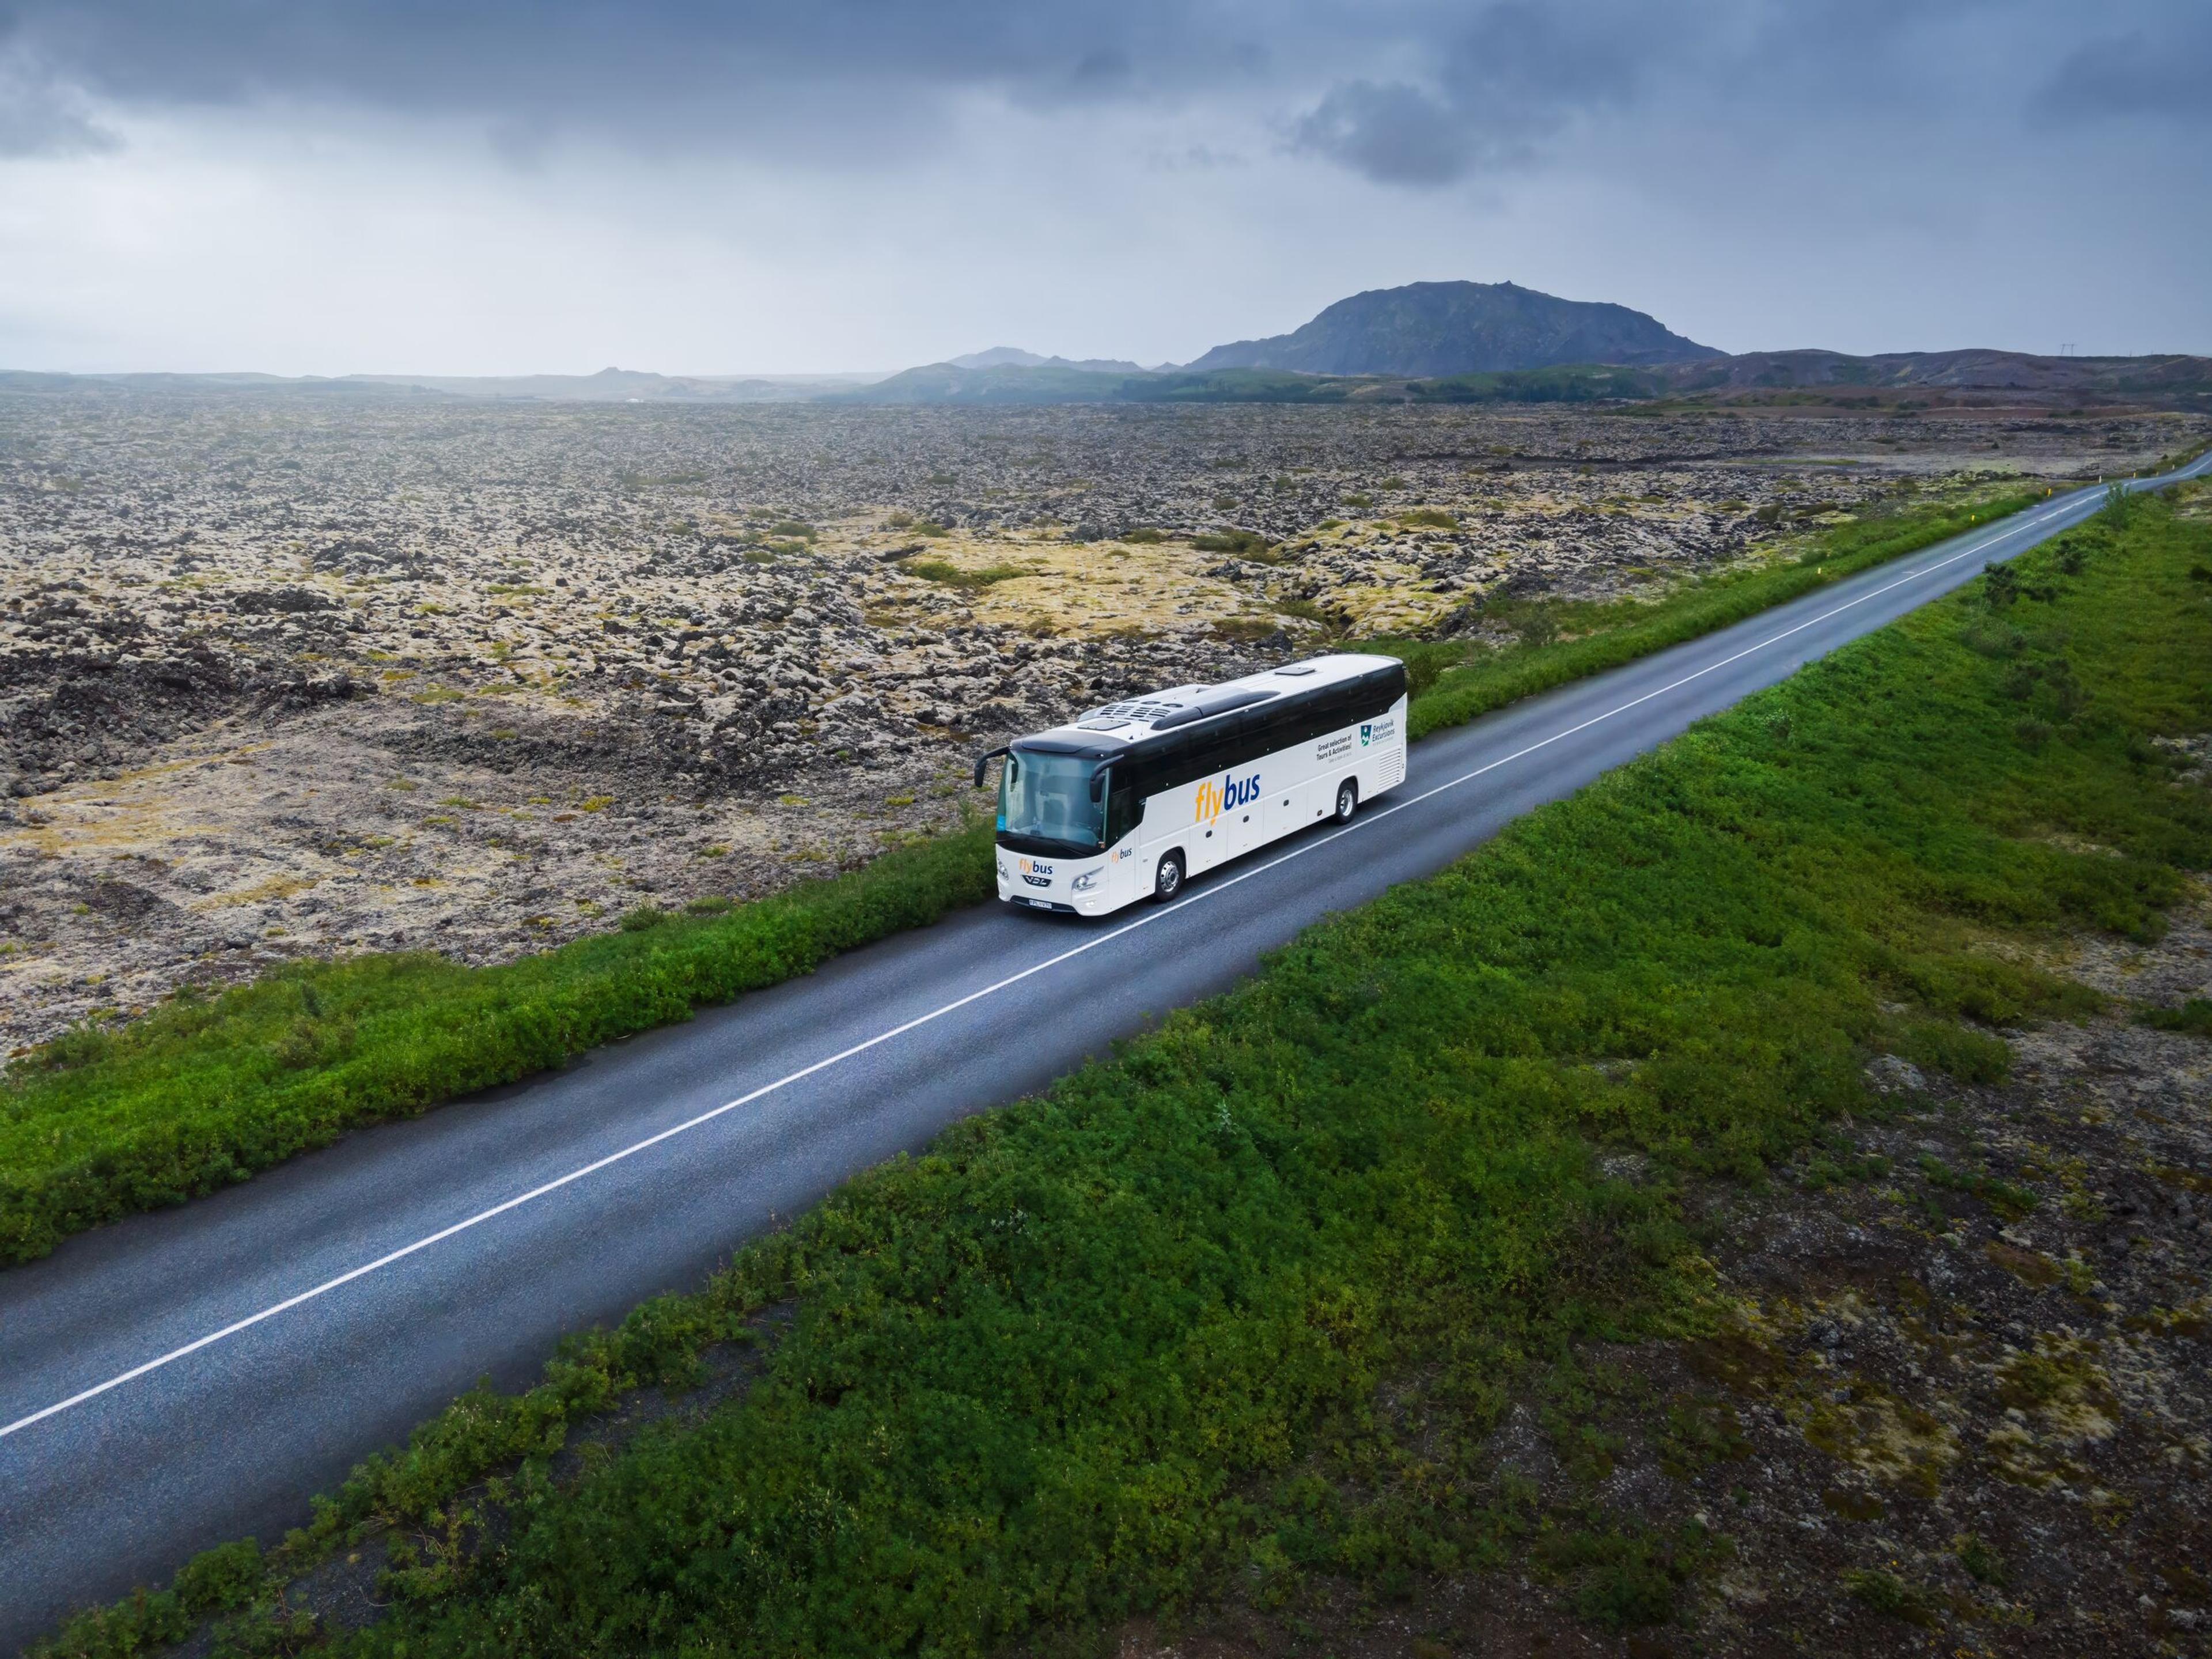 A flybus coach driving through the icelandic landscape